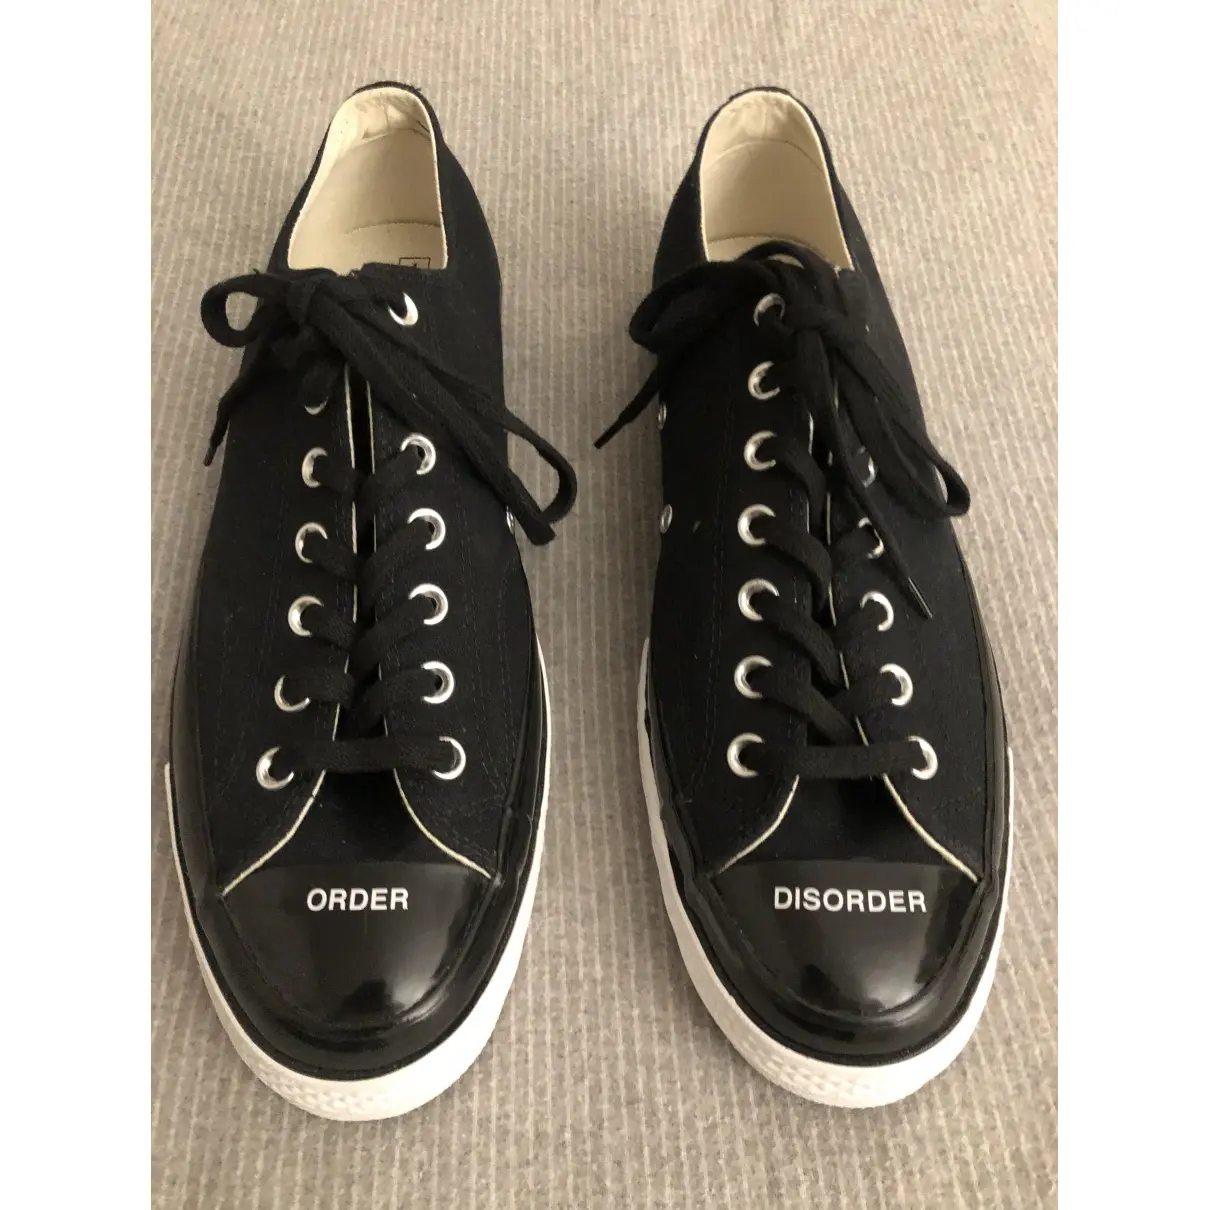 CONVERSE X UNDERCOVER Cloth low trainers for sale